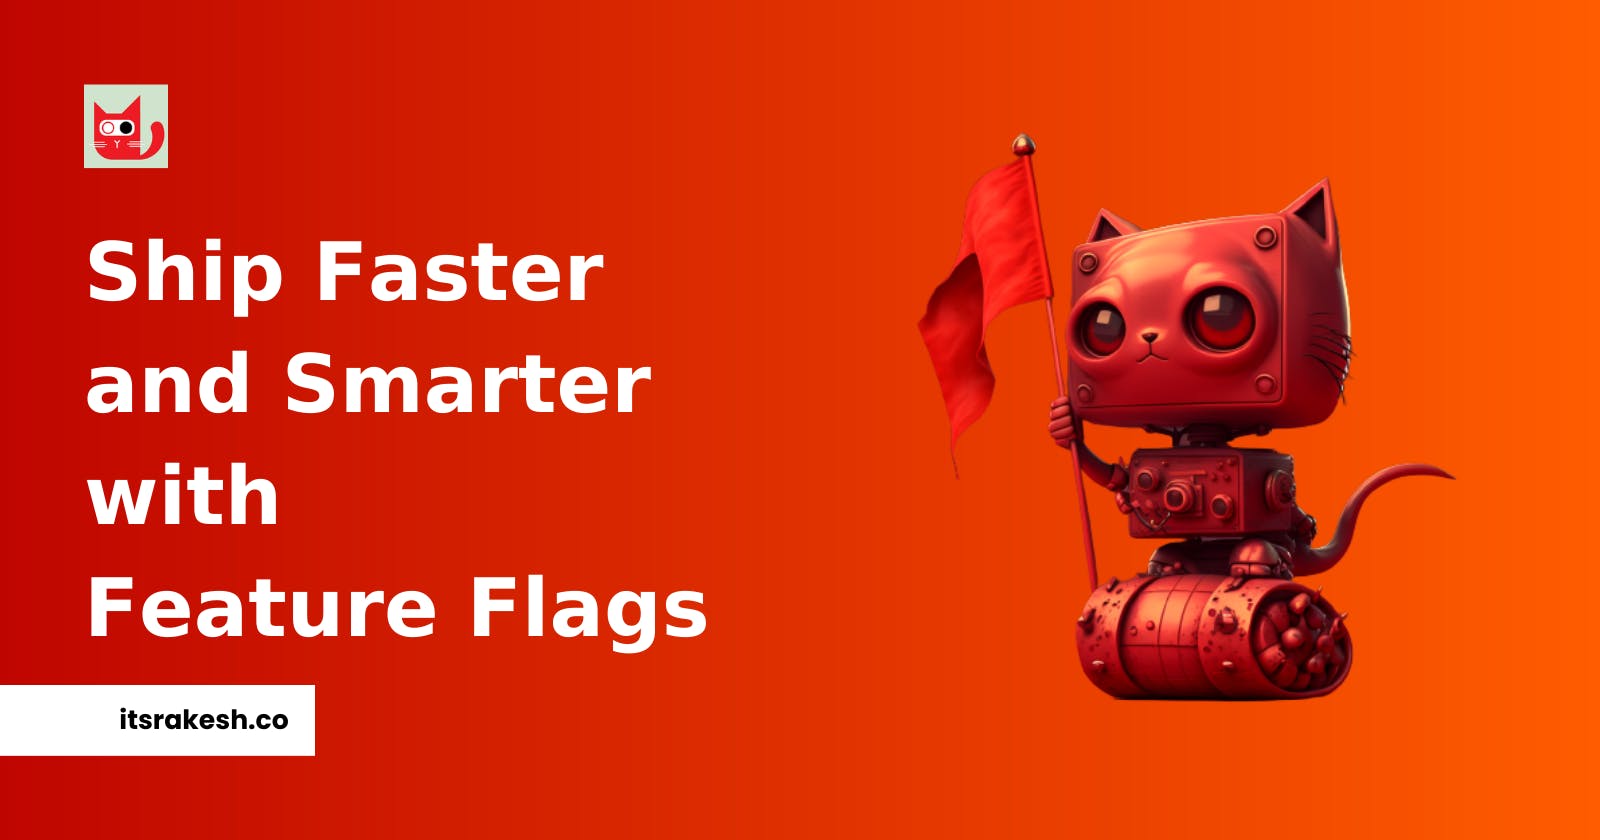 How Feature Flags Can Help You Ship Faster and Smarter?